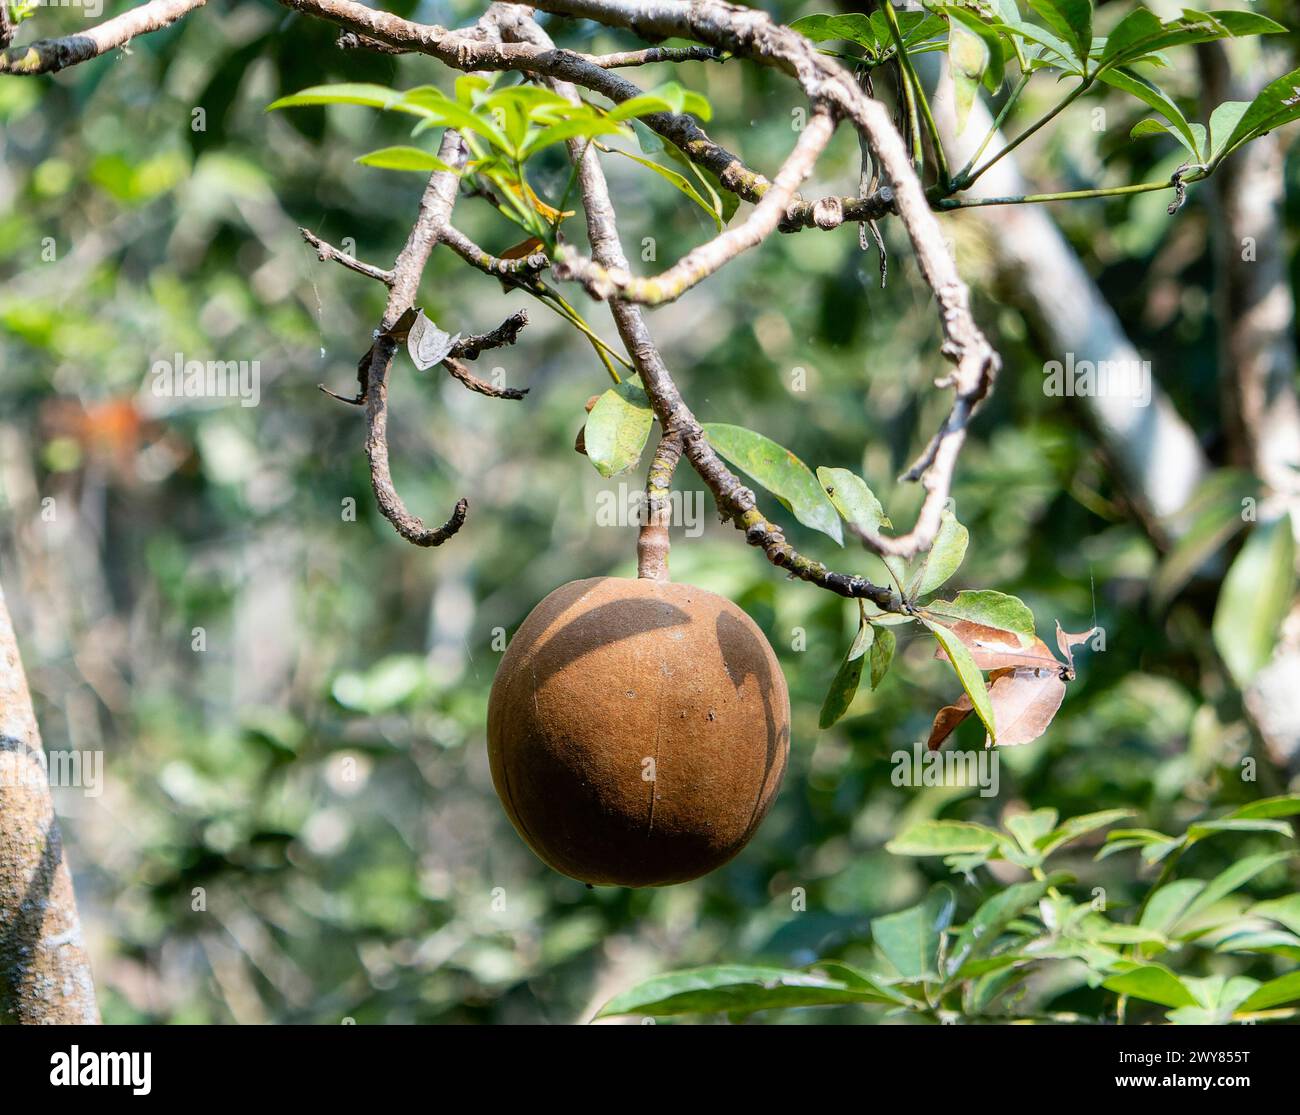 A ripe fruit is seen hanging from a Provision Tree, Pachira aquatica, in a dense forest in Mexico. The fruit is surrounded by lush green foliage and d Stock Photo